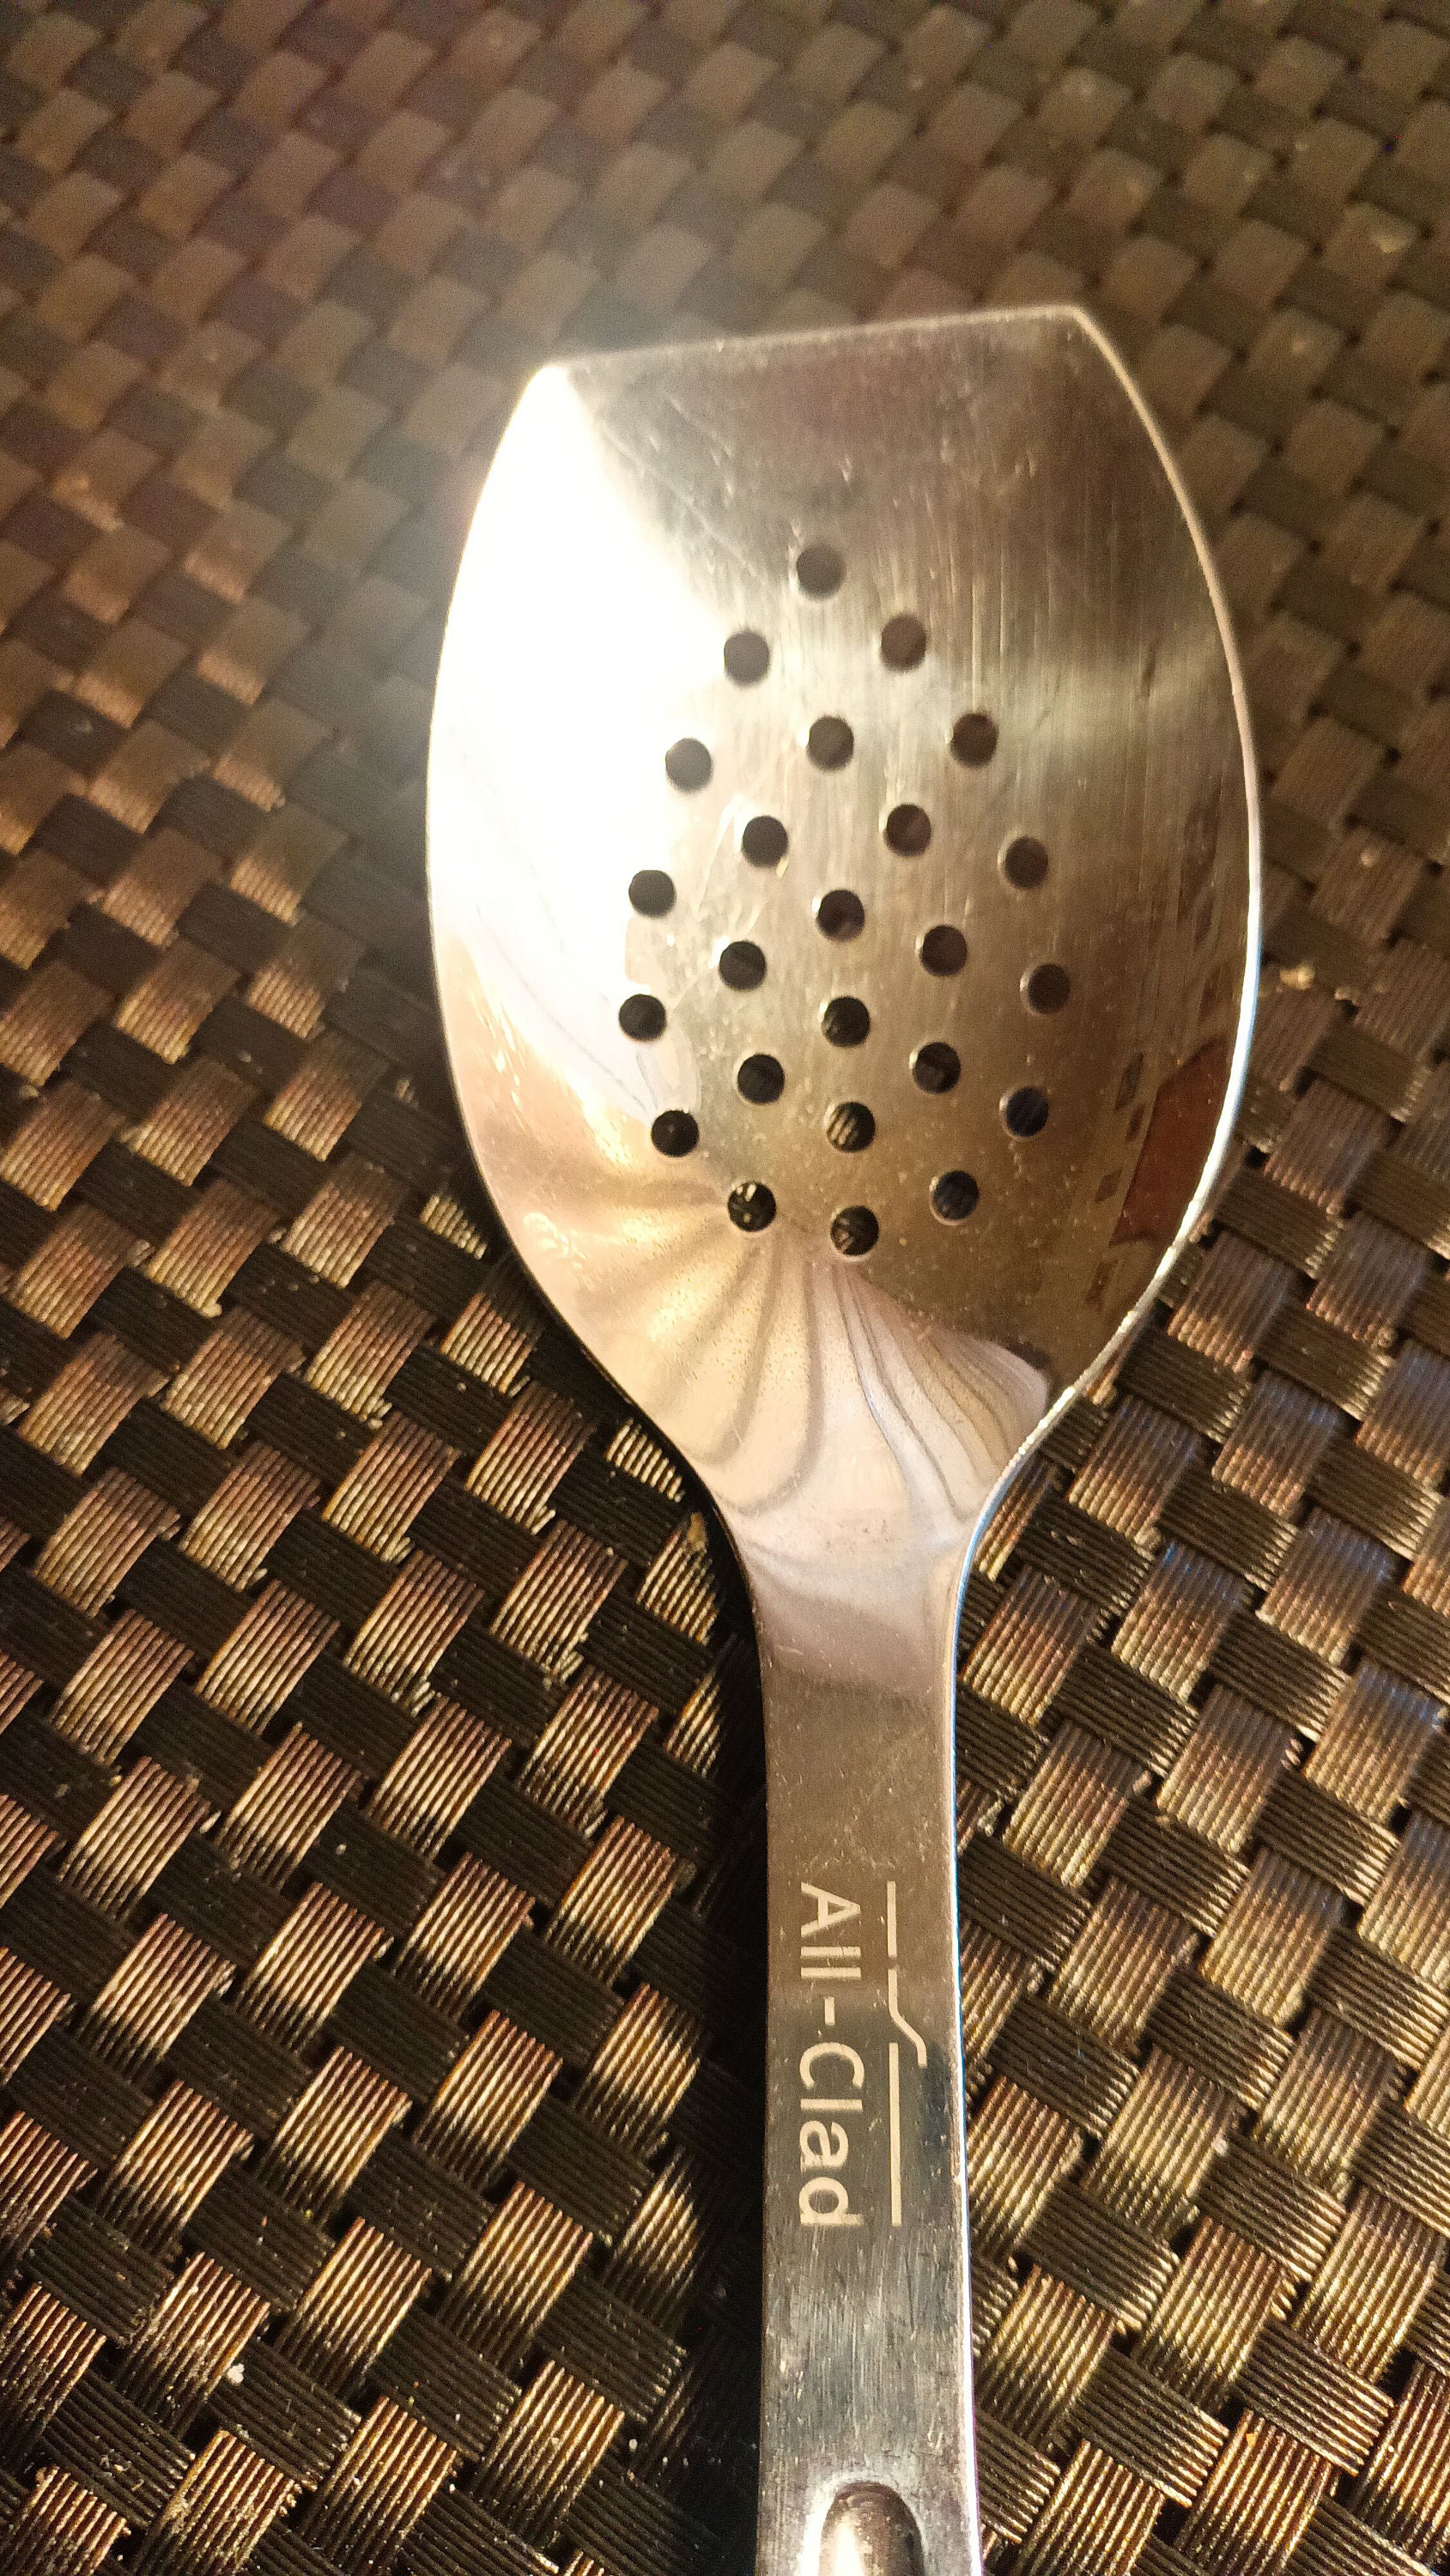 All-Clad Precision Stainless-Steel Turner/Spatula